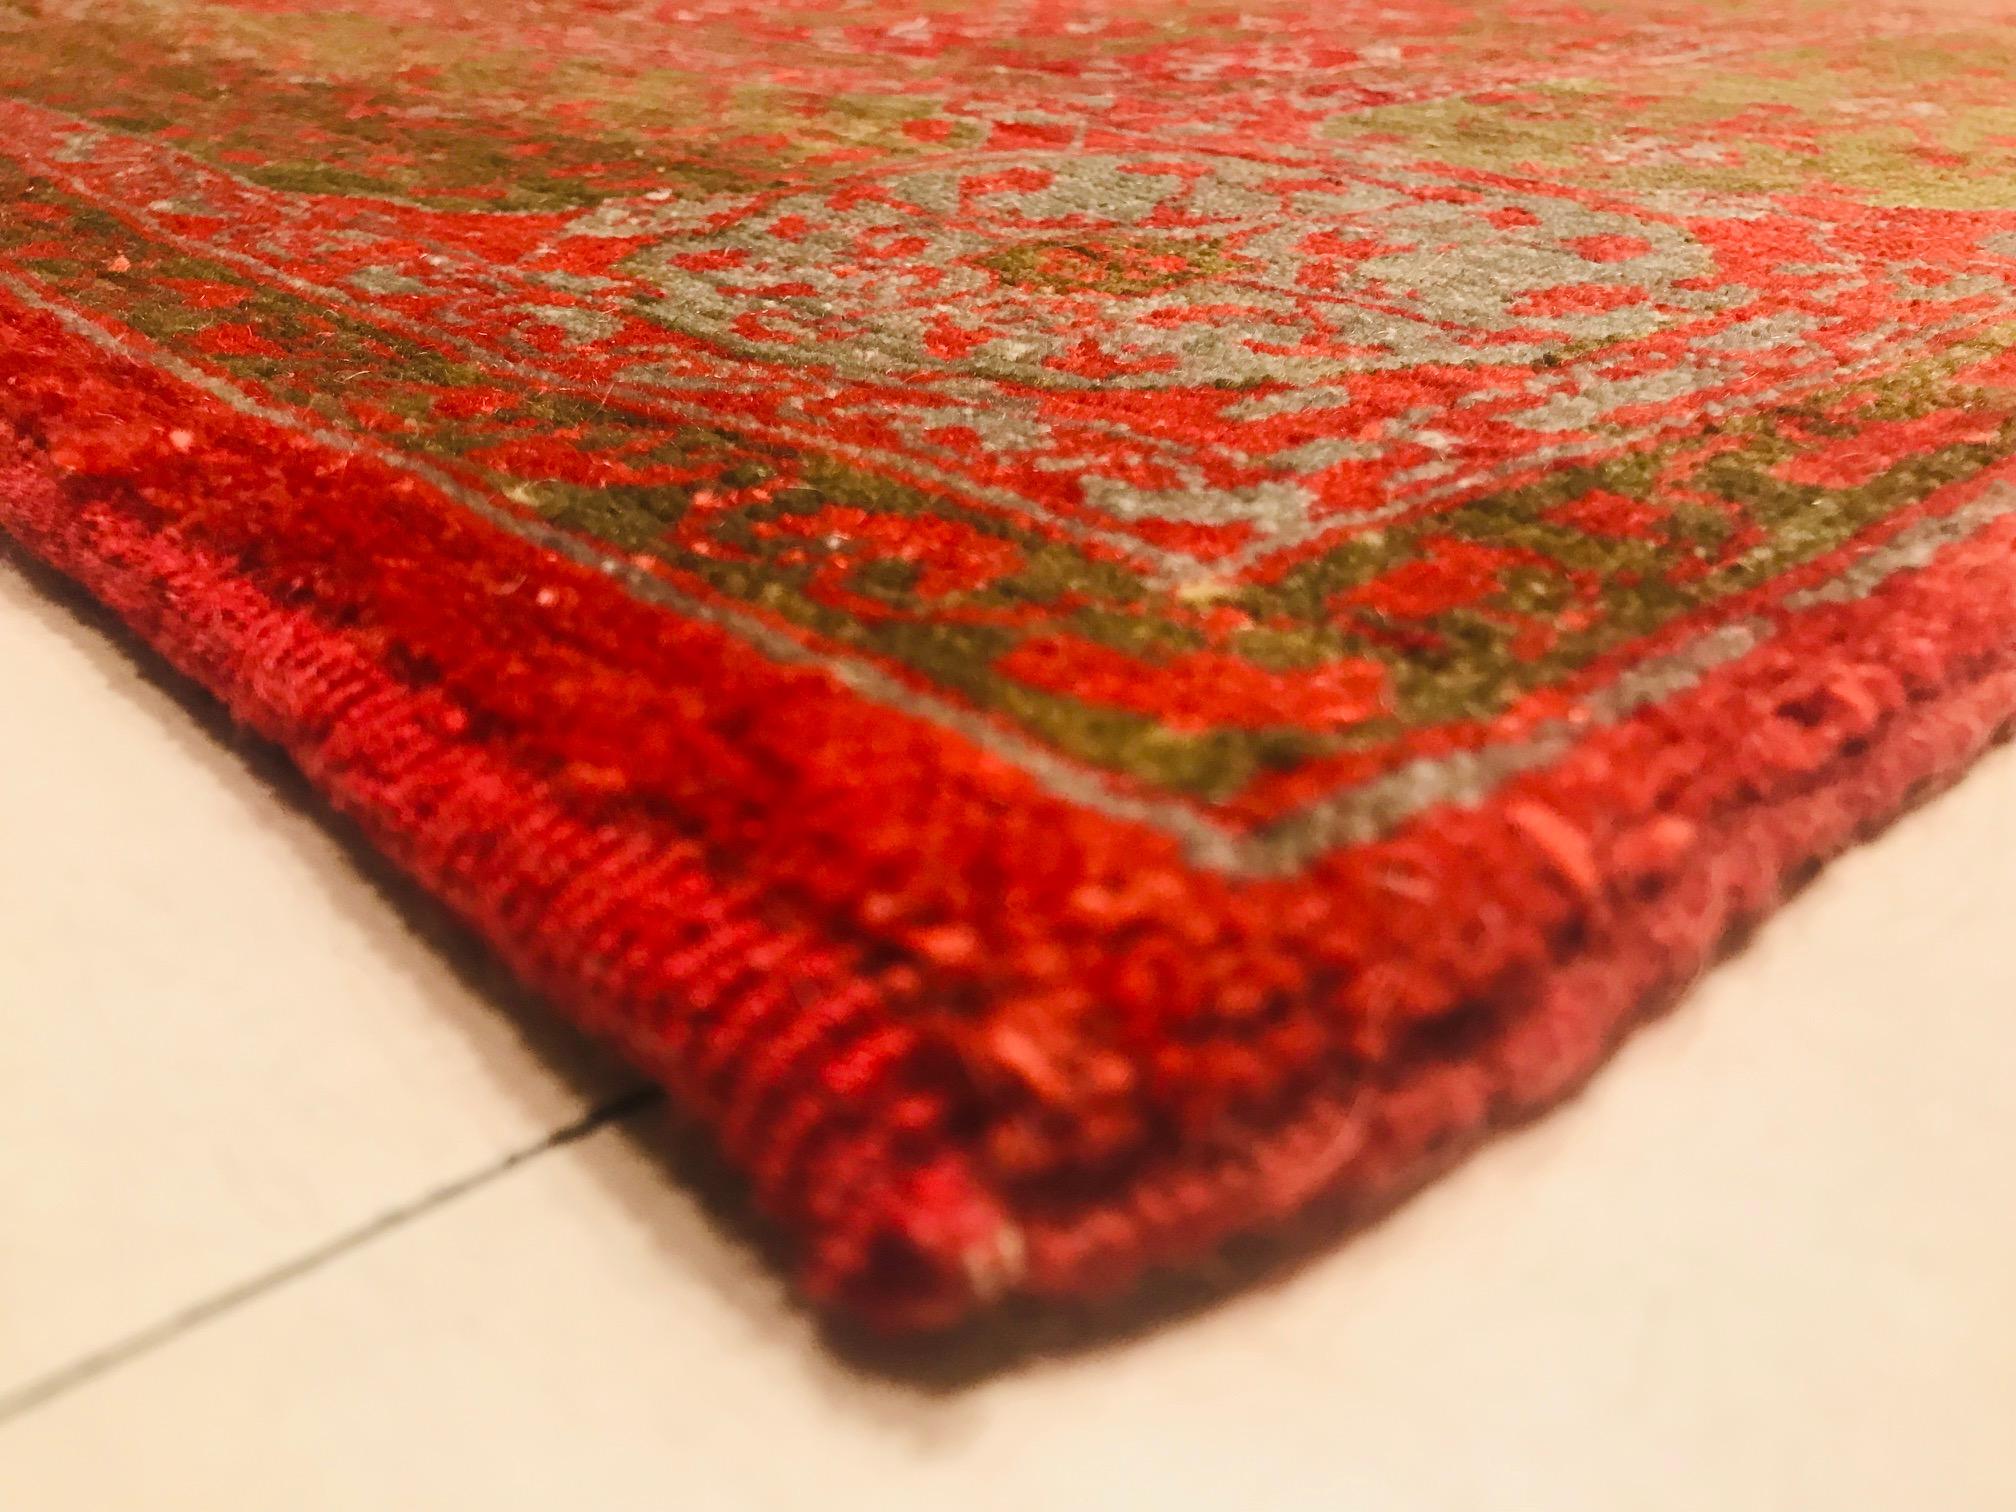 20th Century Hand-Knitted in Wool Rug or Carpet in Red and Green Colors For Sale 2